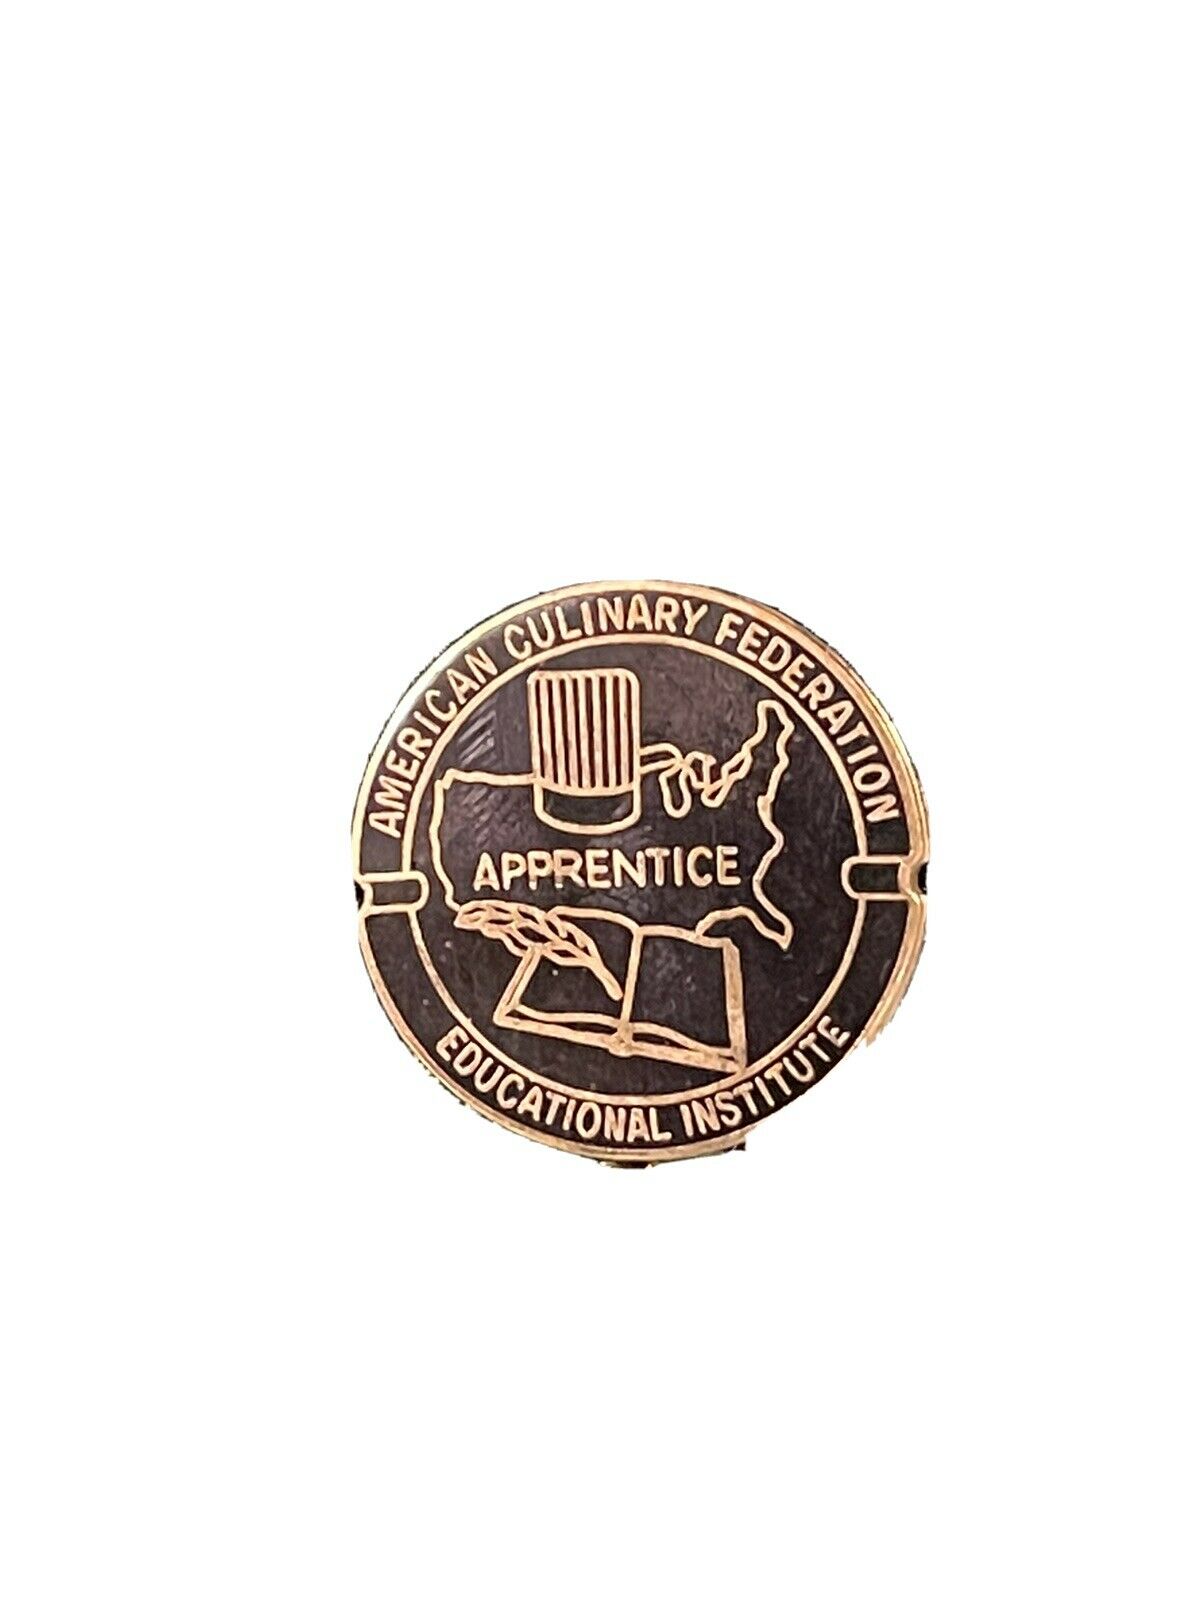 Vintage American Culinary Federation Pin Badge Gold And Silver Tone Black Enamel